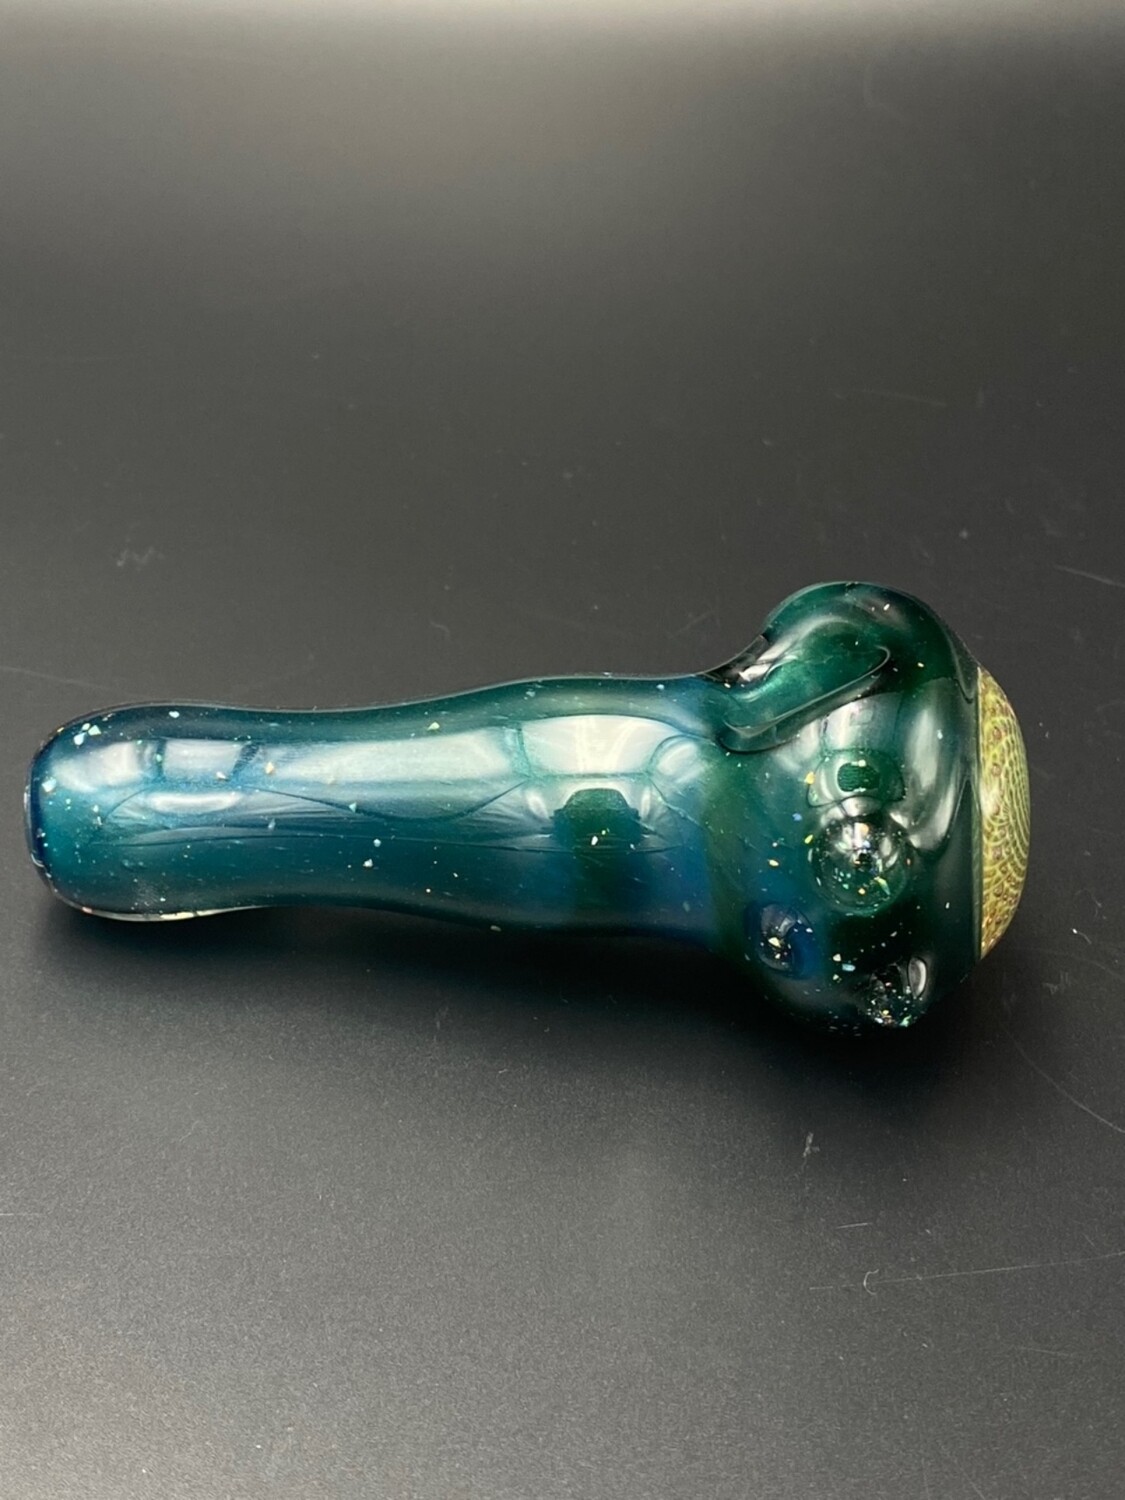 Berzerker (CO) Handpipe w/ Crushed Opal and Fumicello - Teal